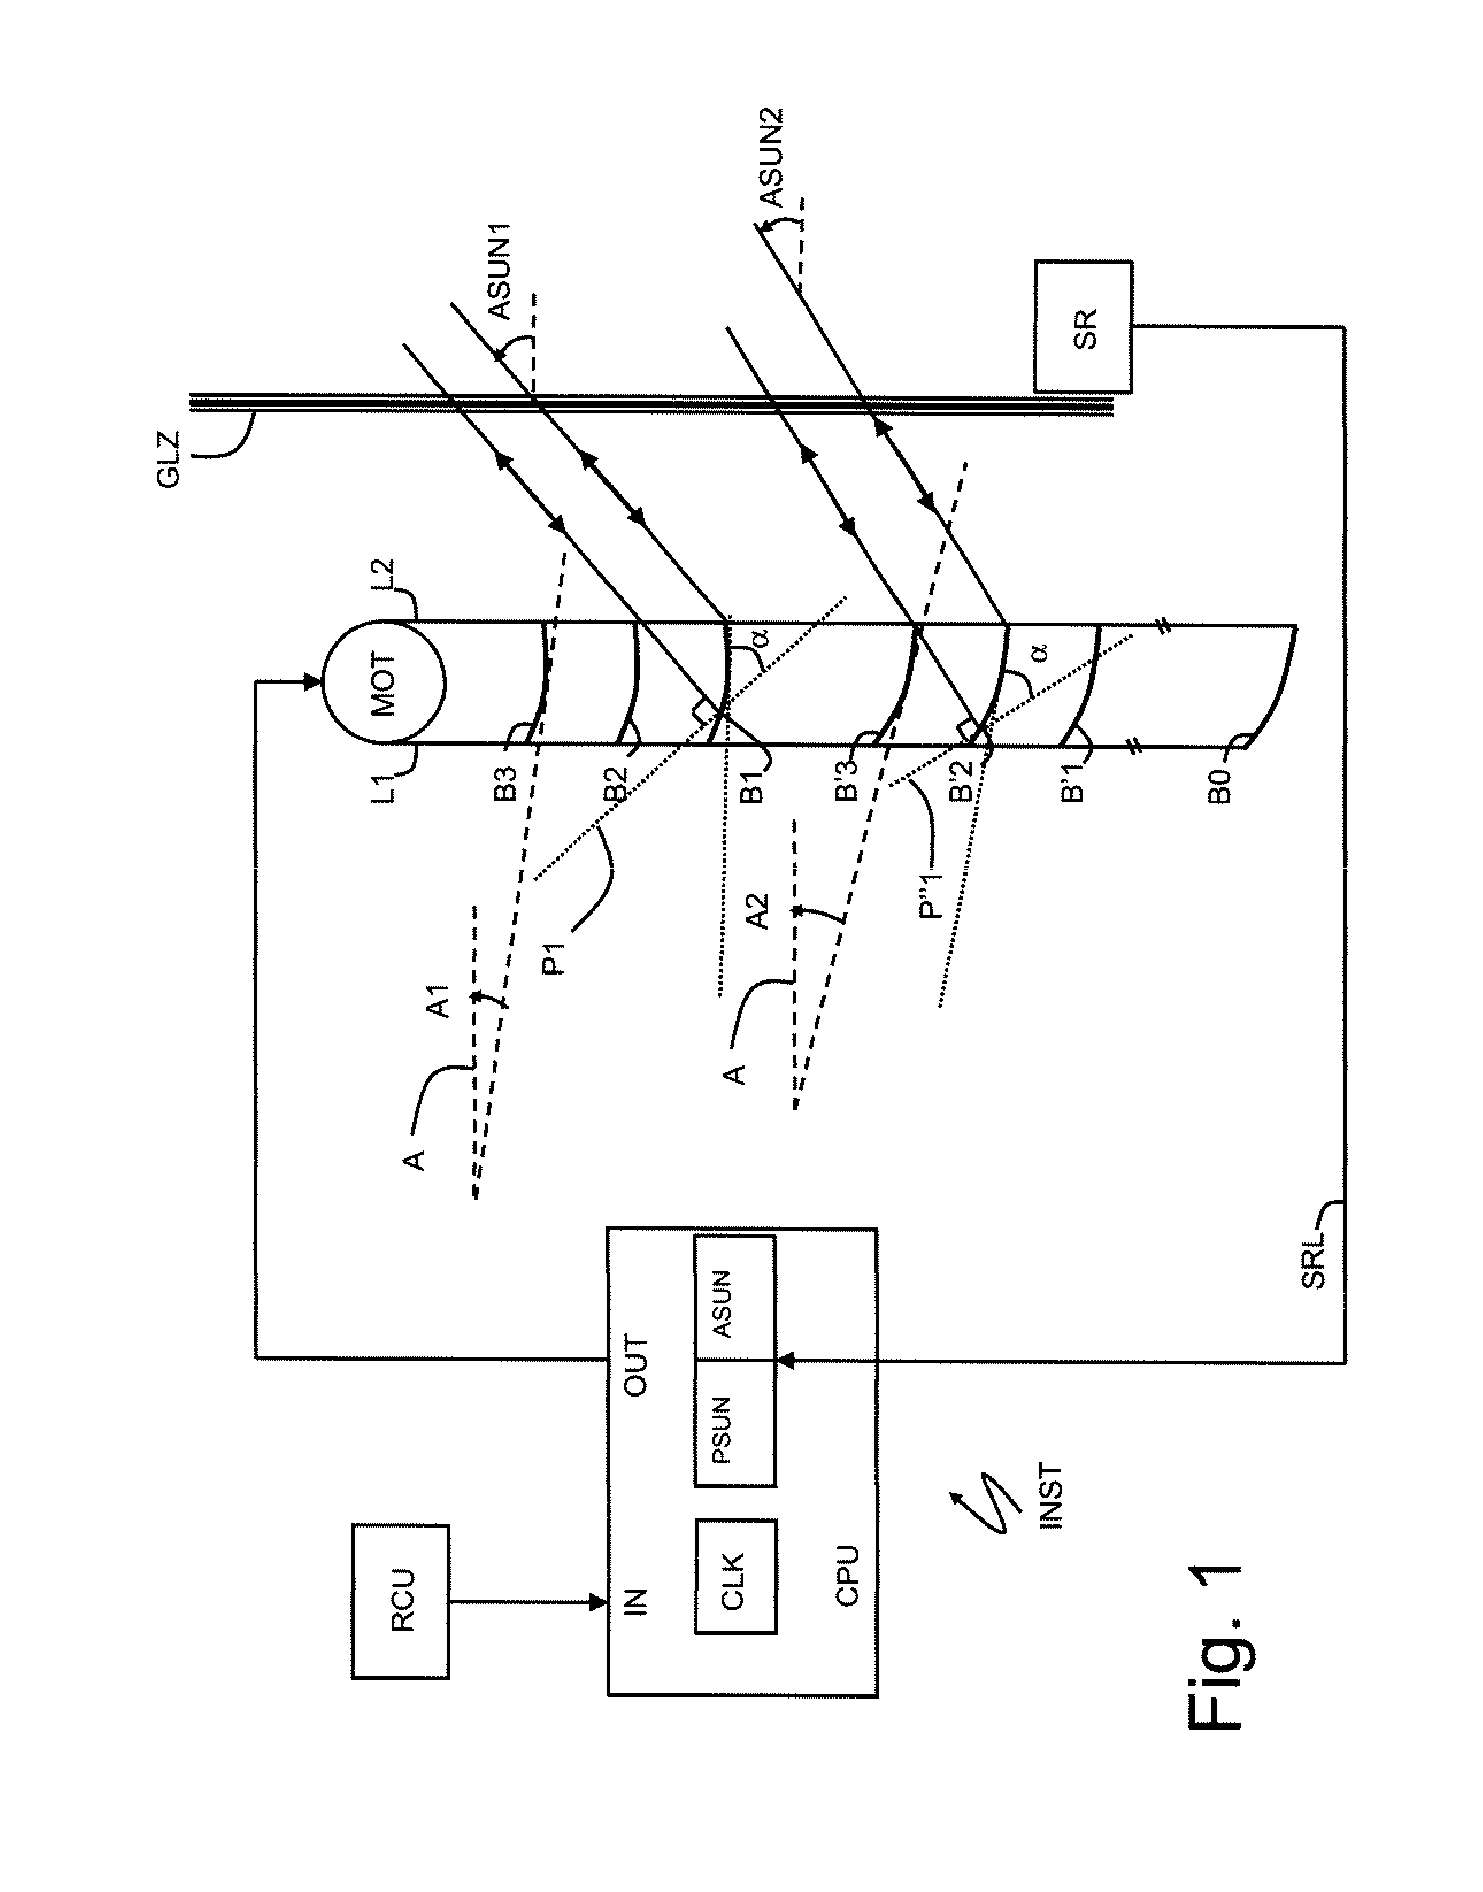 Method for the automated control of a solar protection installation